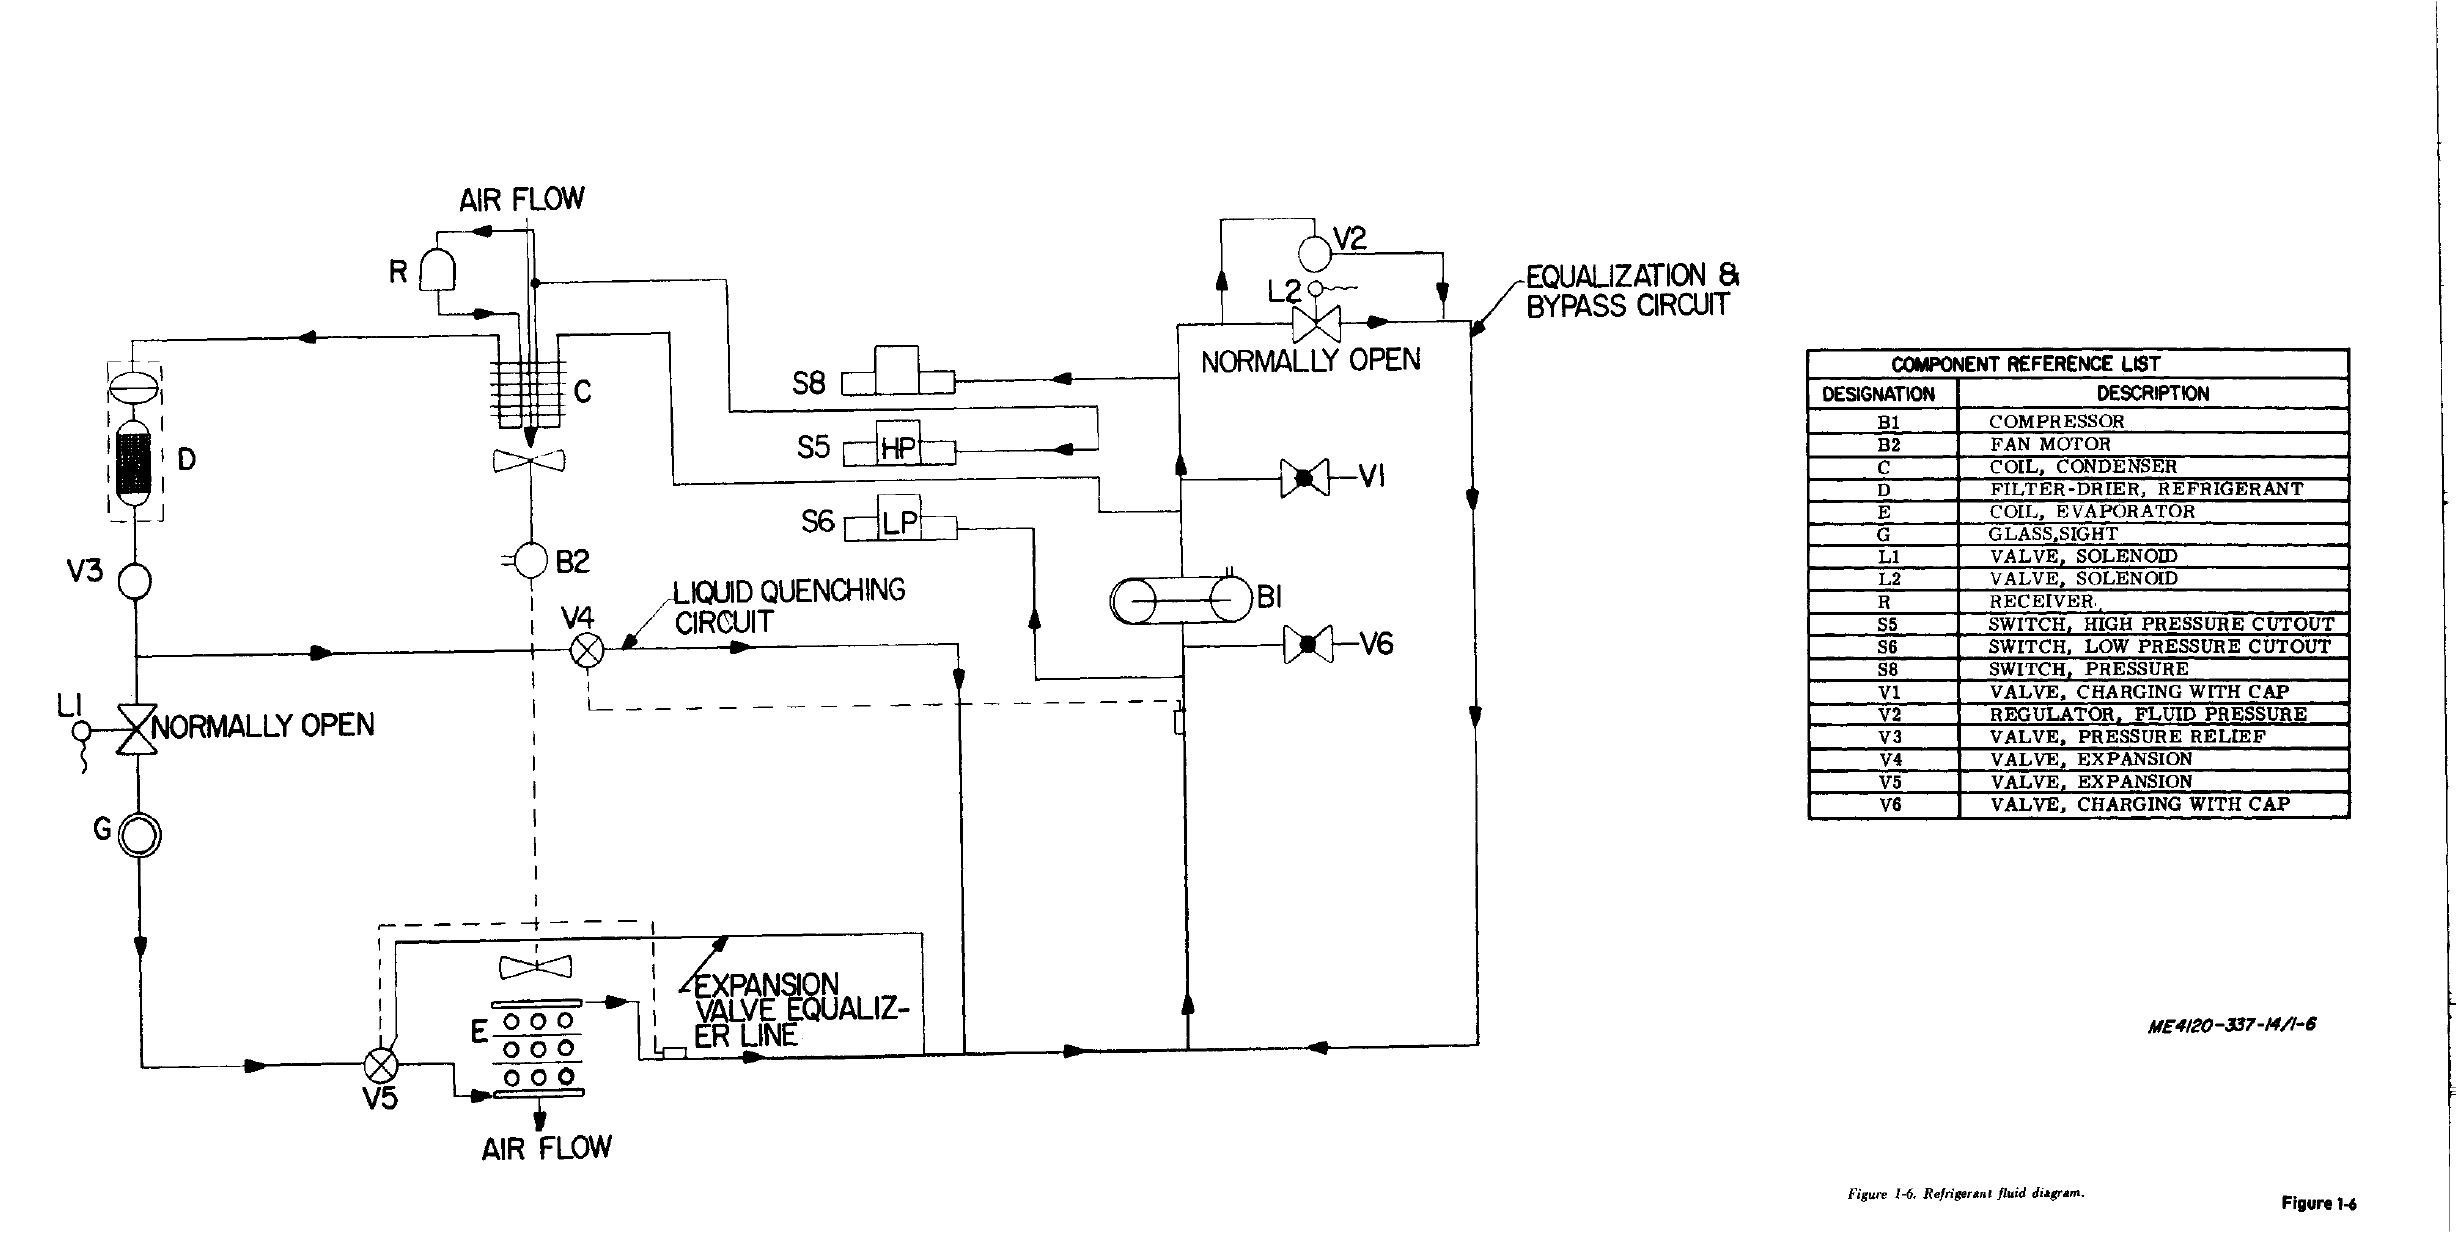 York Rooftop Unit Wiring Diagram Beautiful Wiring Diagram Carrier Air Conditioner Copy York Throughout